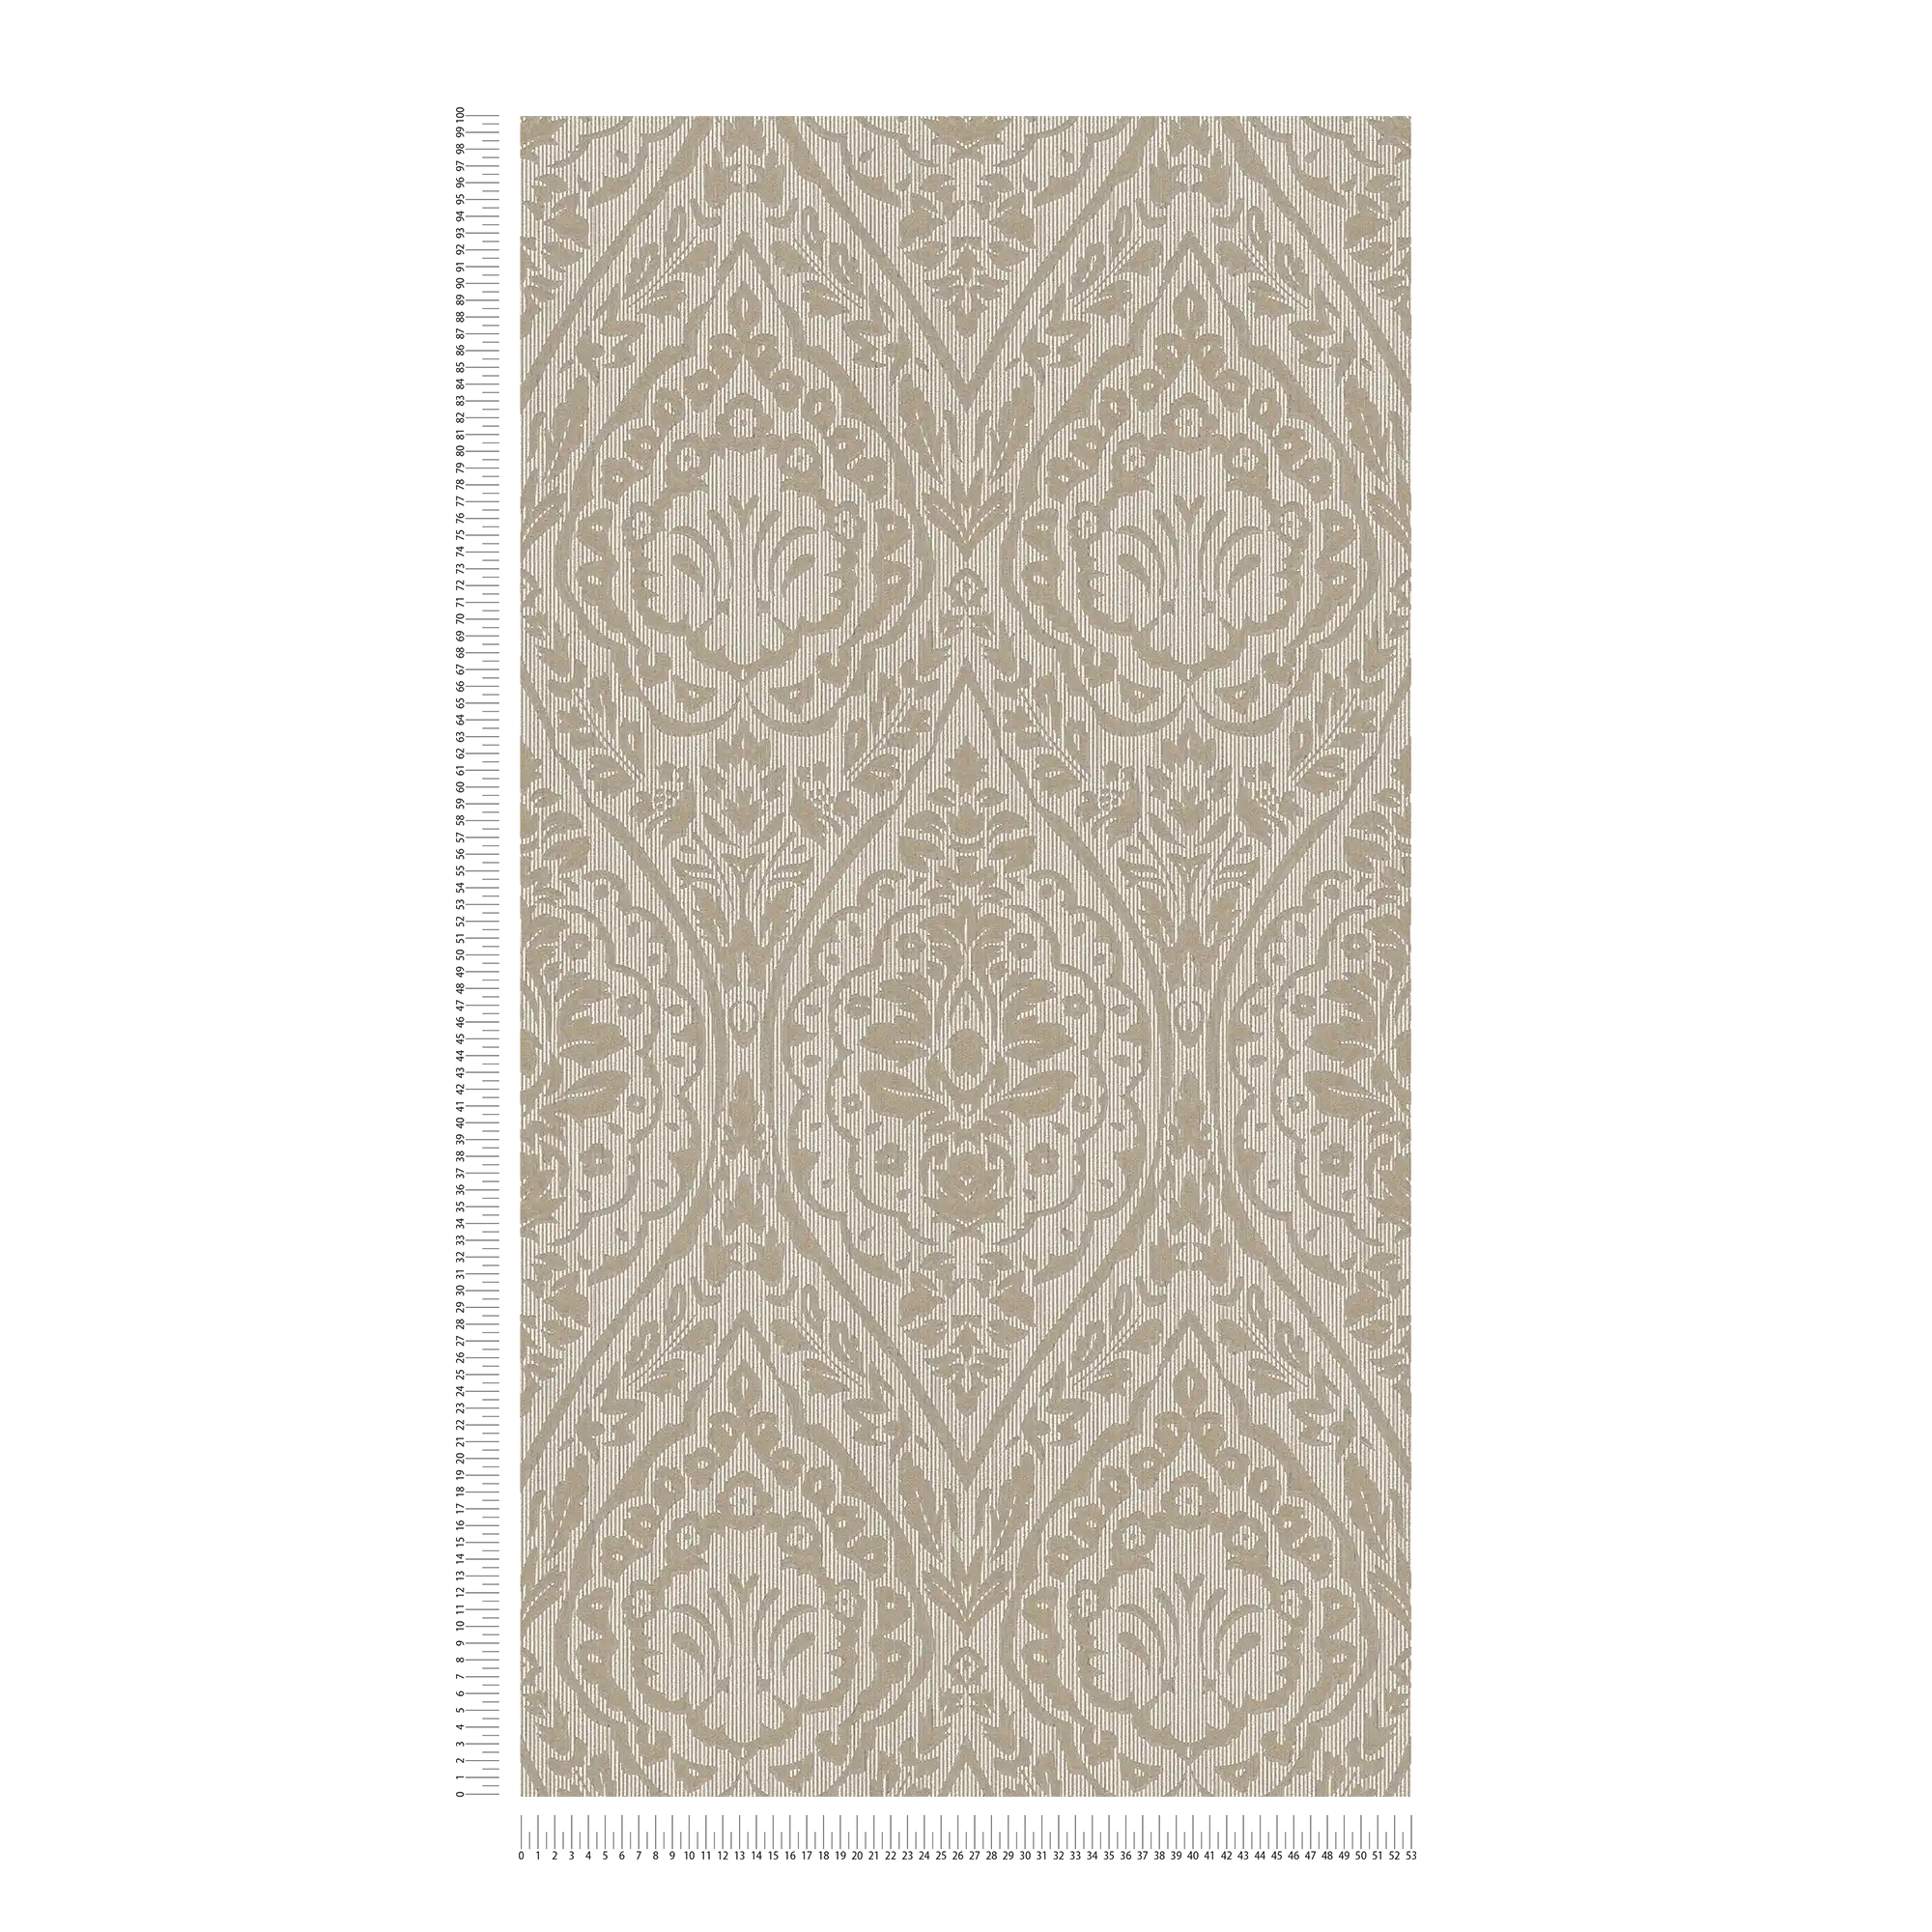             Wallpaper floral pattern with colonial style ornaments - beige, brown
        